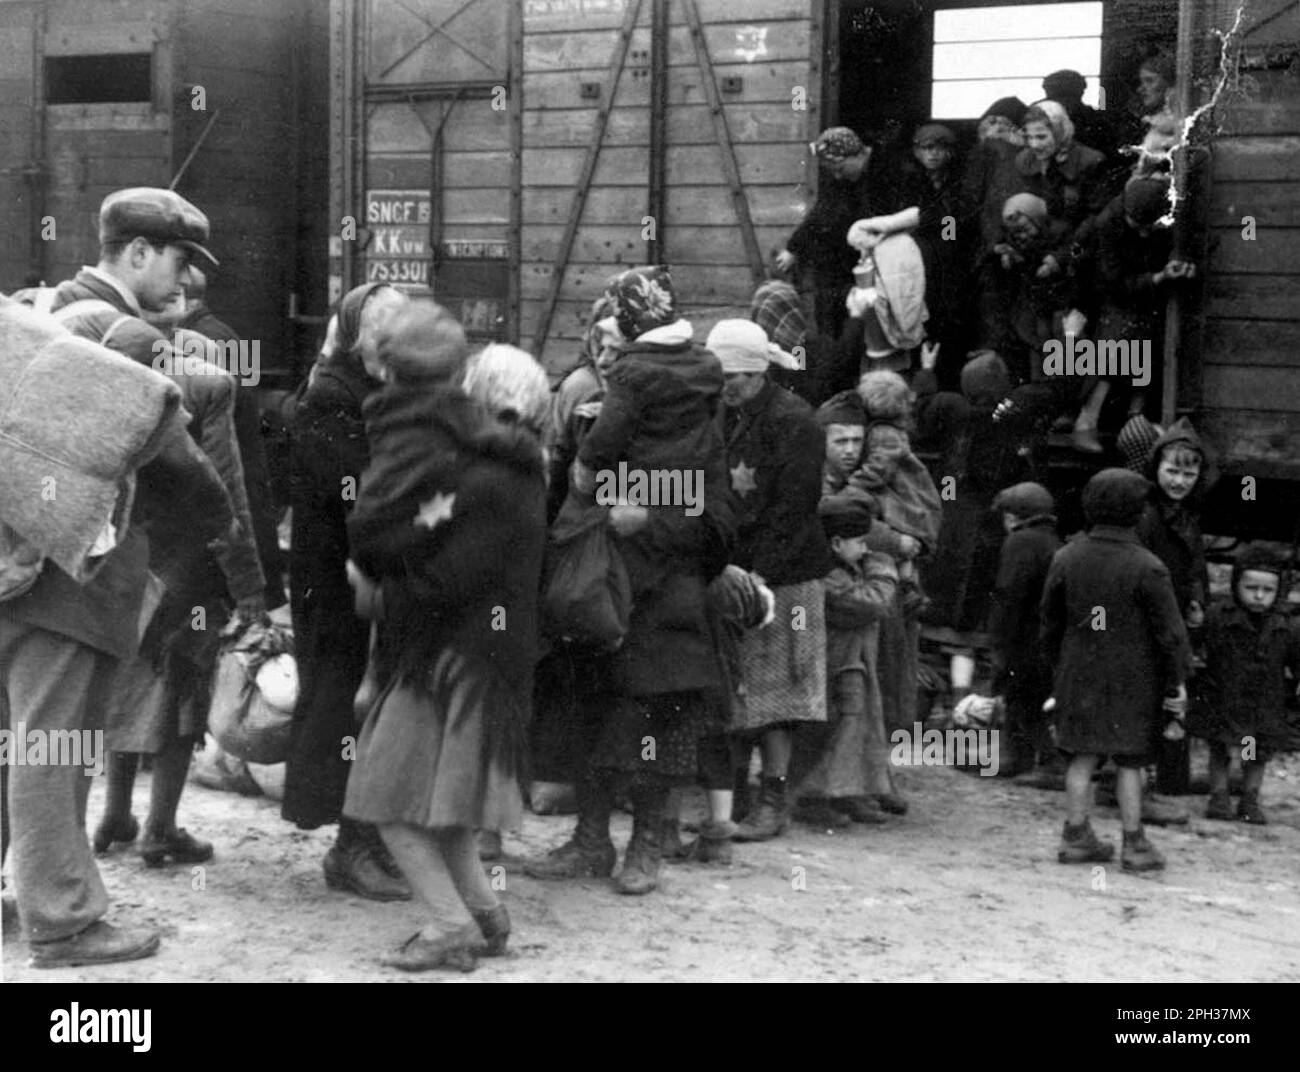 Jews descending from the fright trains on their arrival at Auschwitz extermination camp. From here they went to Selection, which consisted of being selected for death straight away in the gas chambers or being sent as a forced slave labourer. Stock Photo